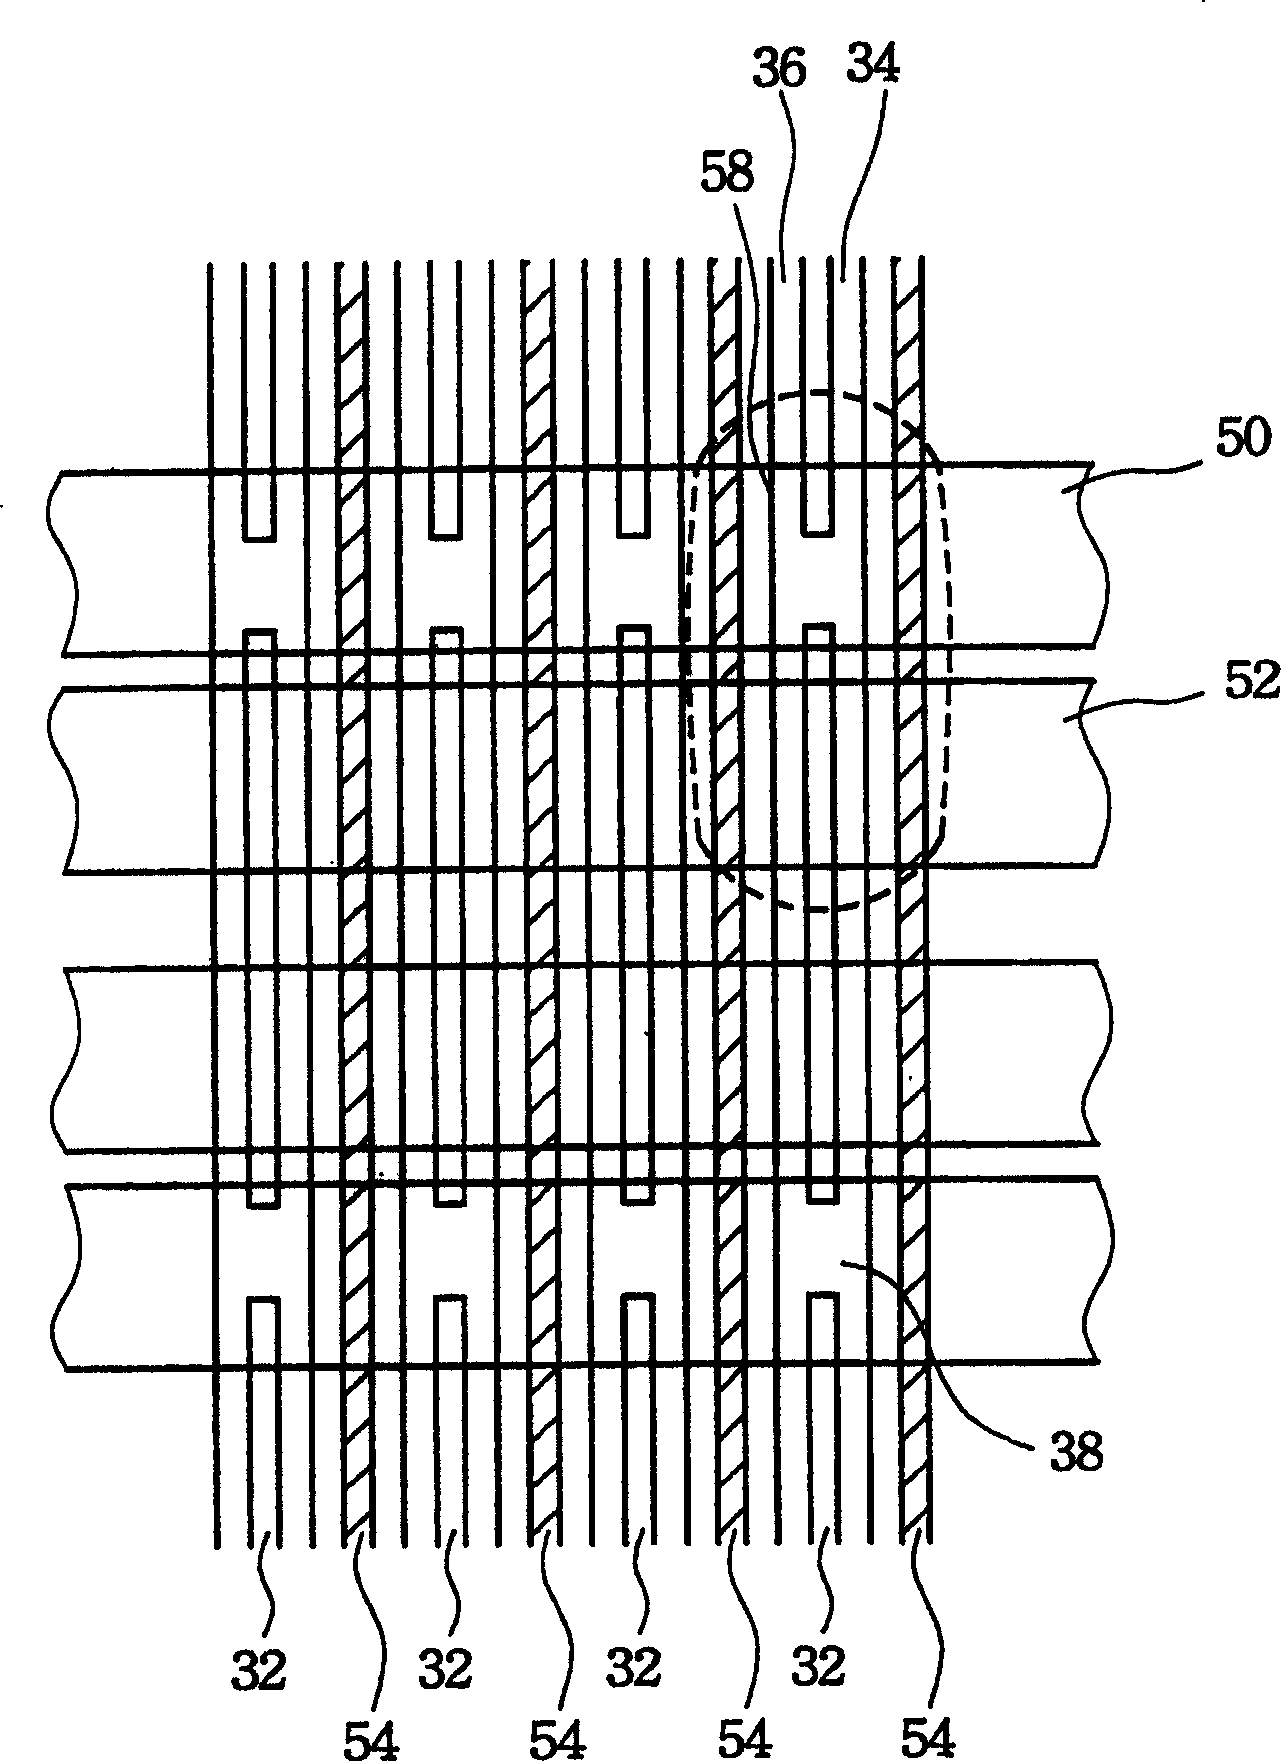 Structure for addressing electrodes in plasma panel display